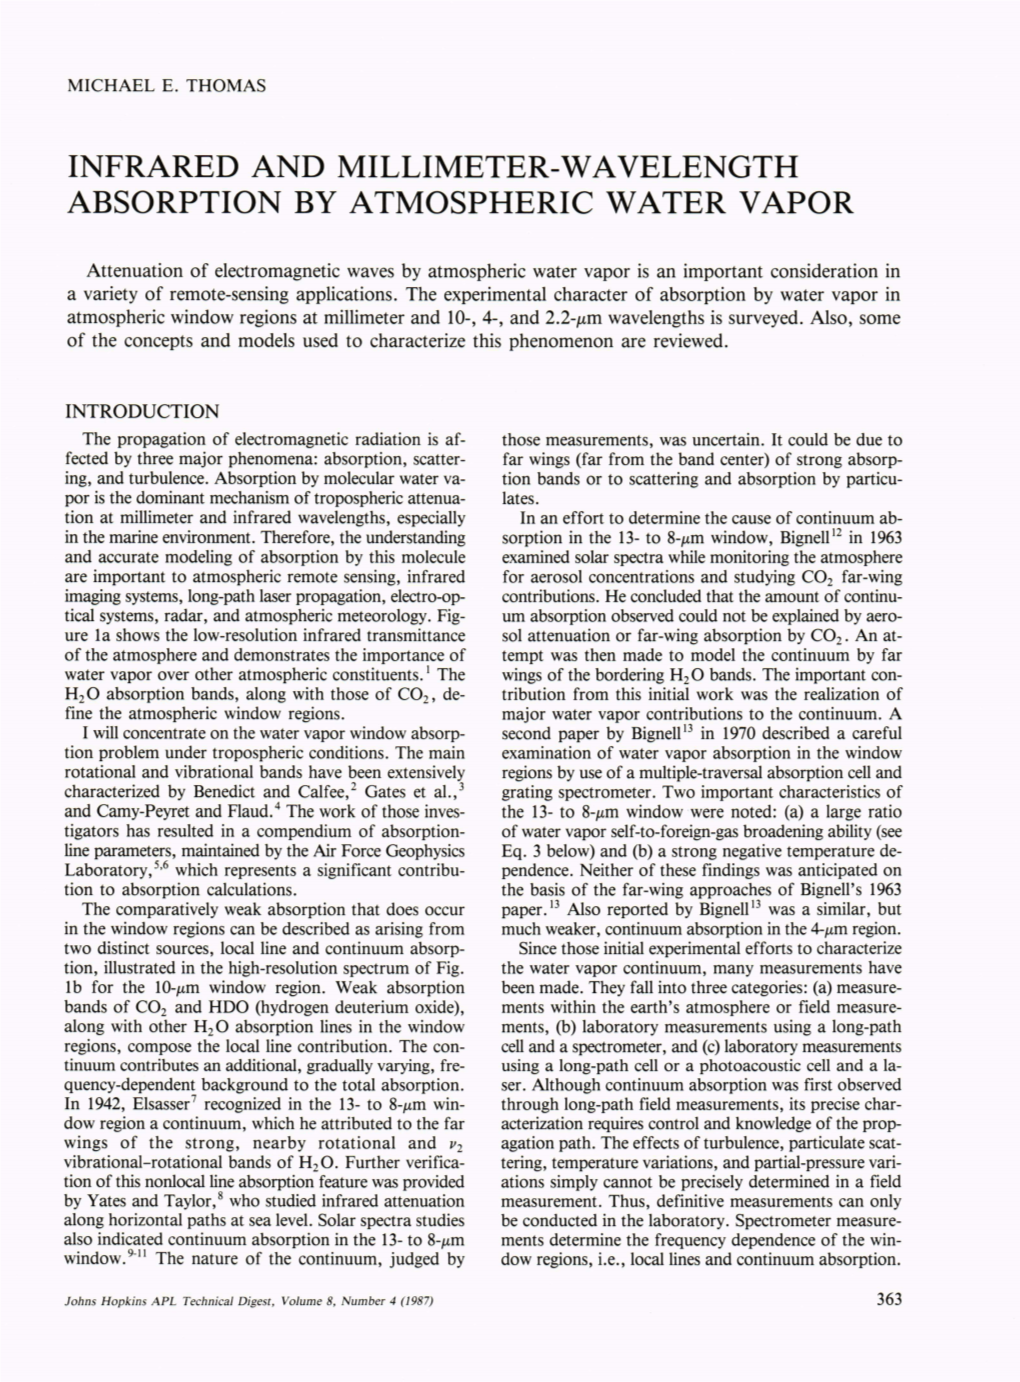 Infrared and Millimeter-Wavelength Absorption by Atmospheric Water Vapor